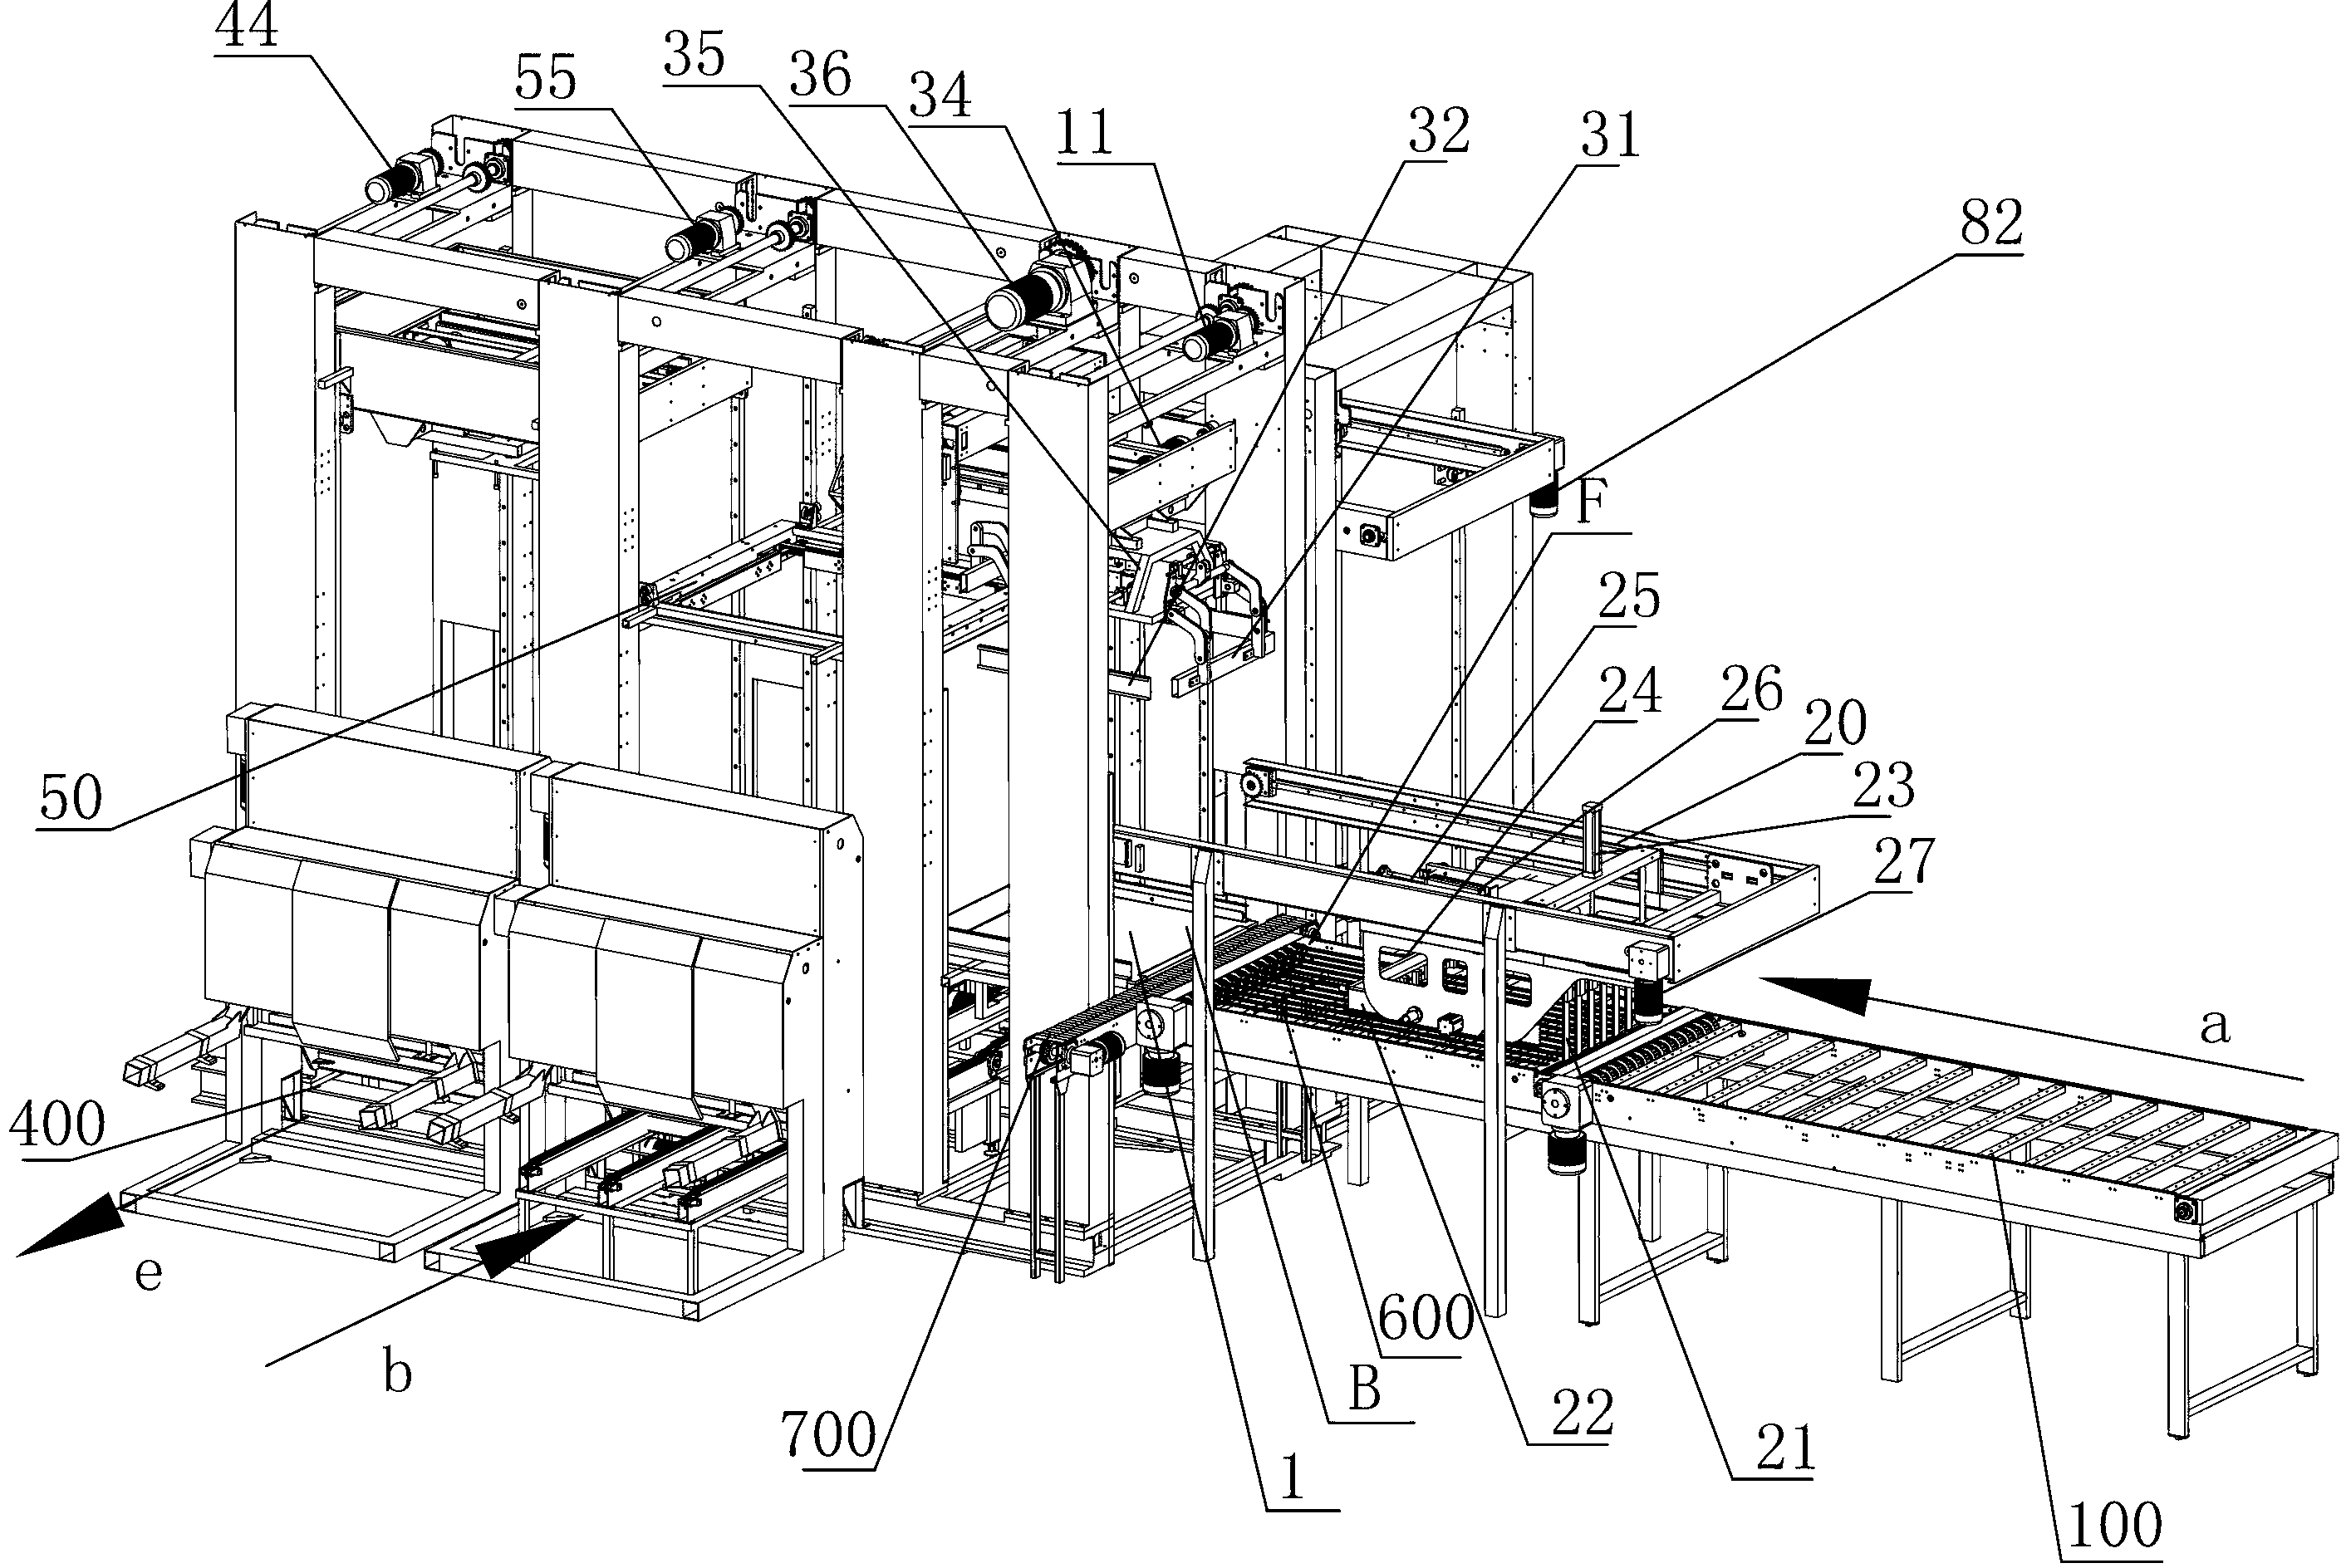 Bottle stacking machine capable of feeding and discharging bottles from low position